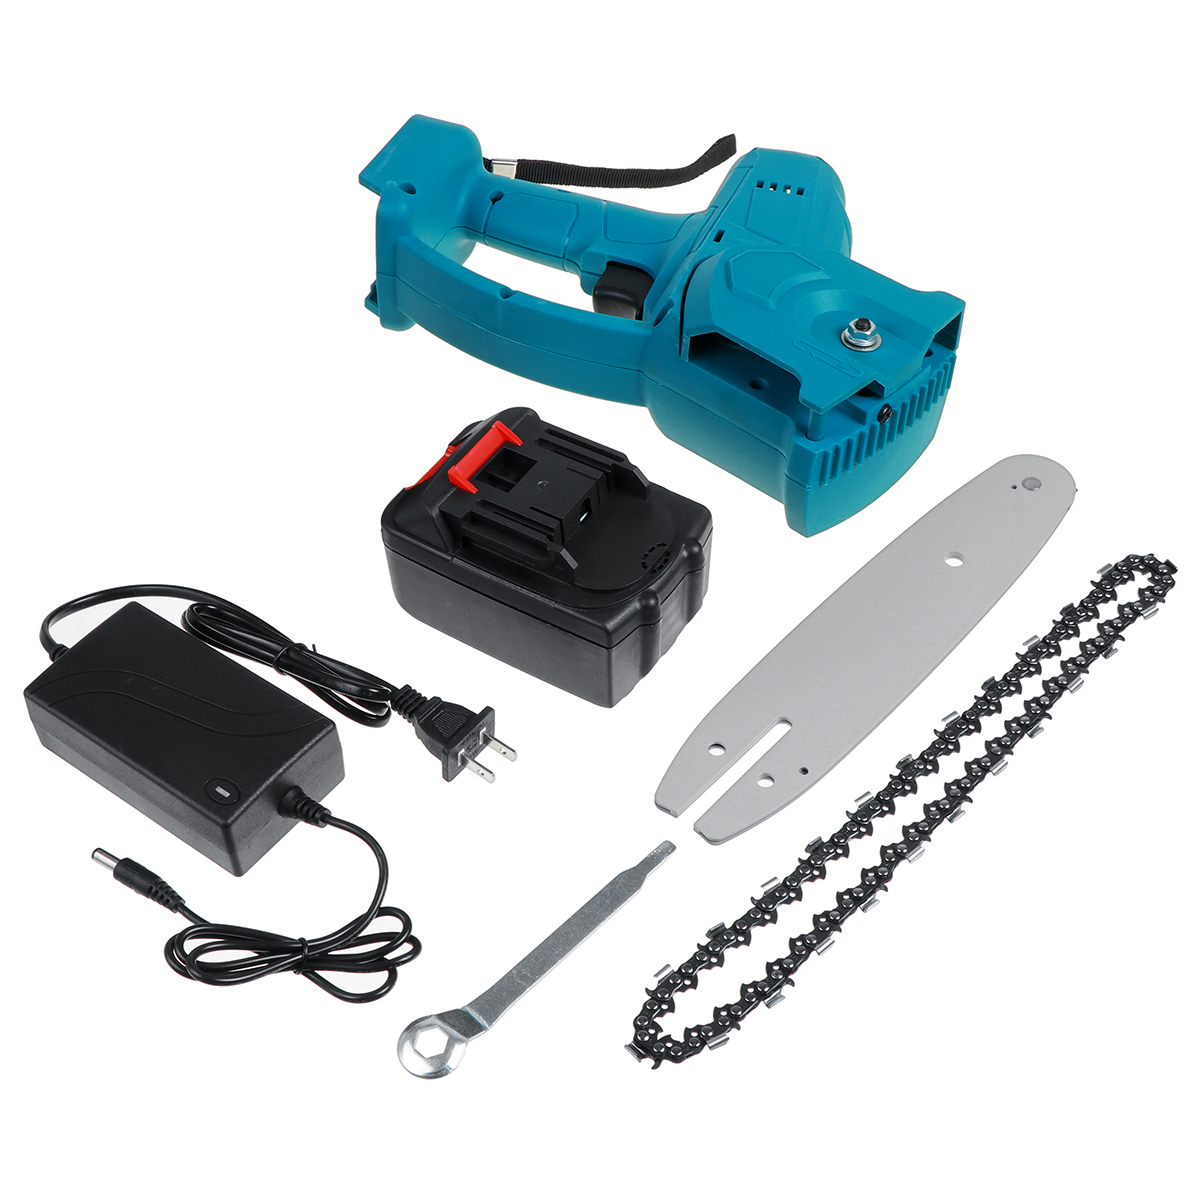 21V-8Inch-1080W-One-Hand-Saw-Woodworking-Electric-Cordless-ChainSaw-Wood-Cutter-Power-Tool-1806127-12